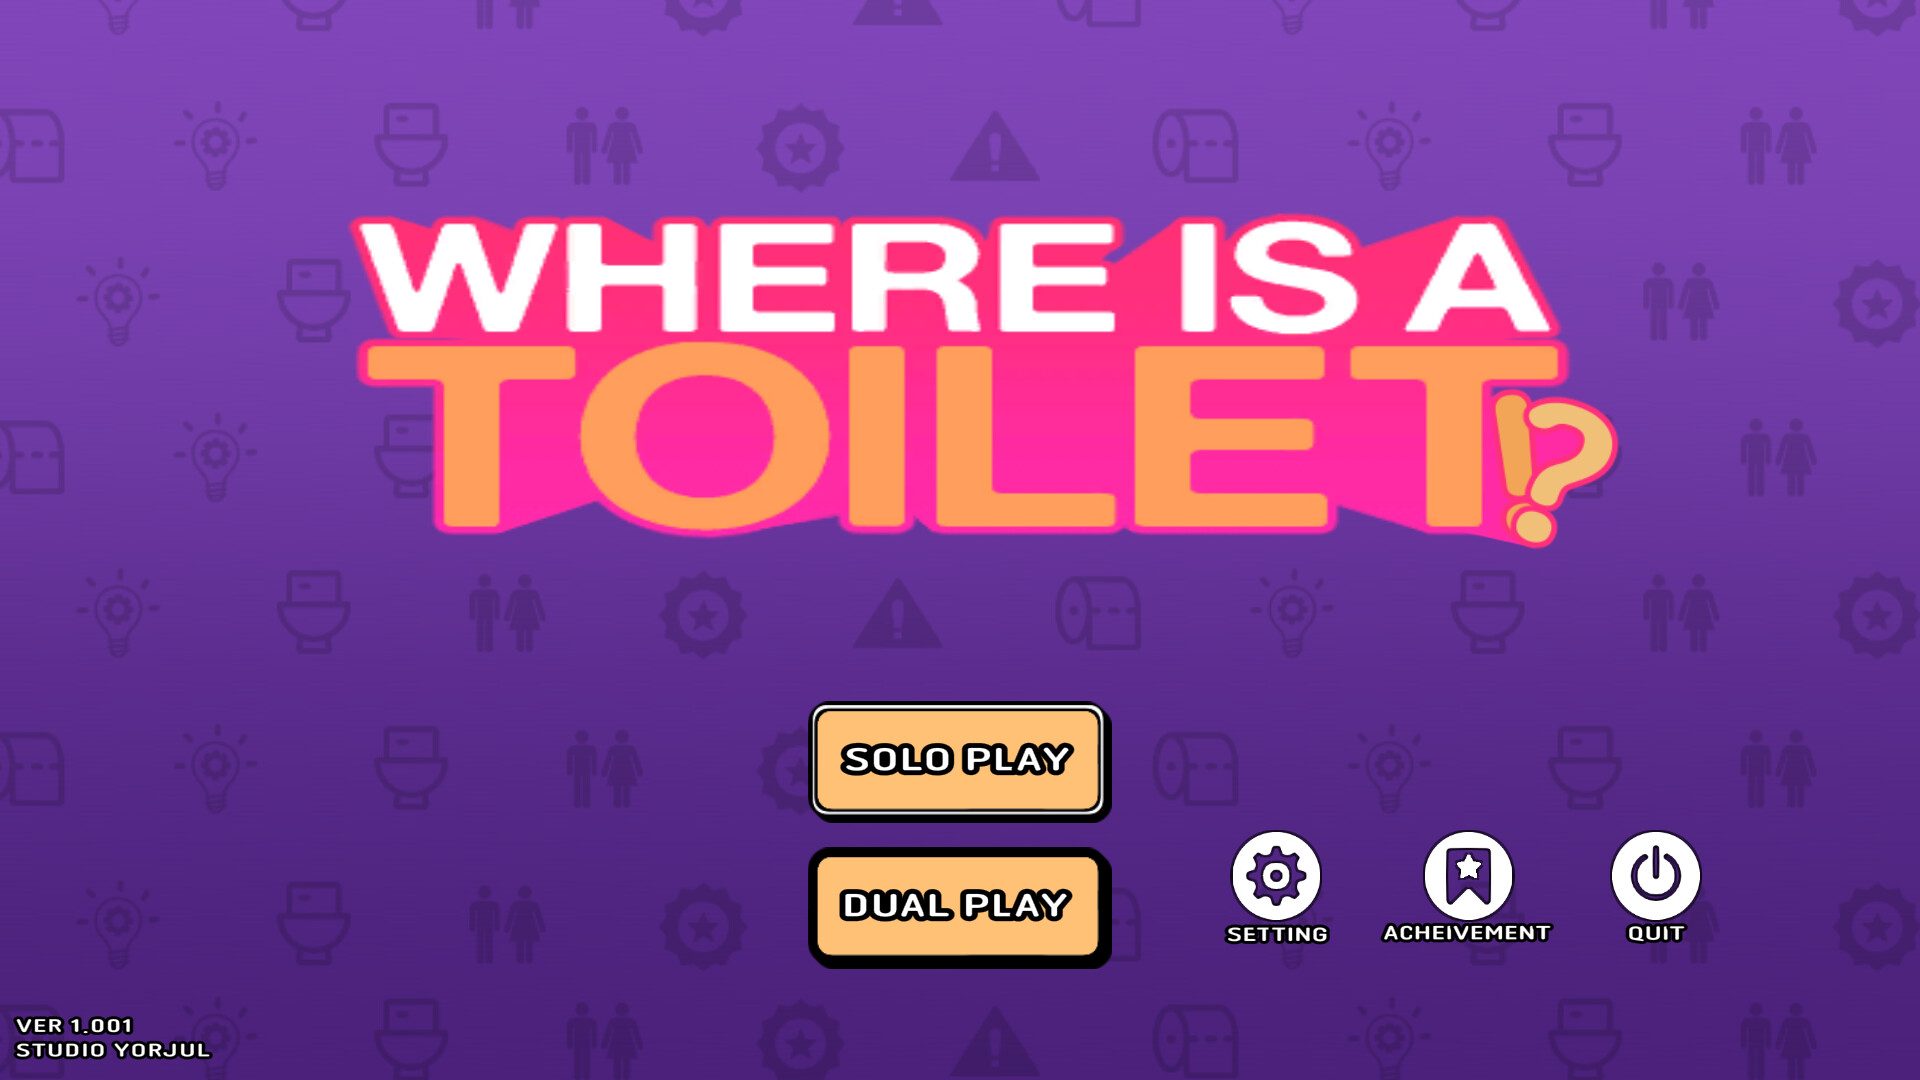 WHERE IS A TOILET!? Demo Featured Screenshot #1